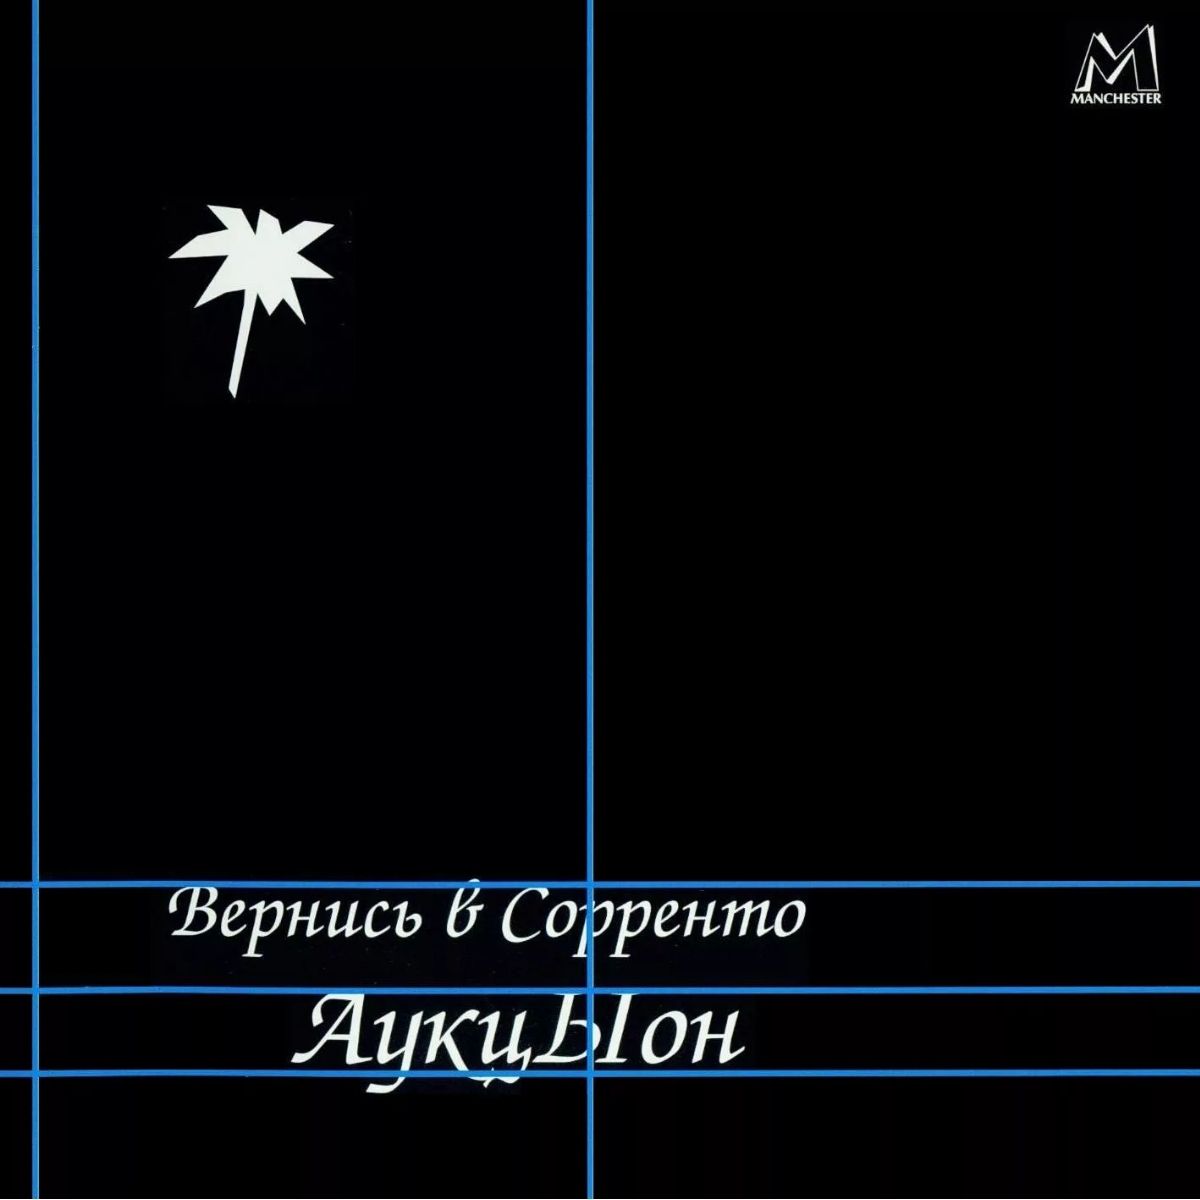 The cover of the debut album "Return to Sorrento" by the group "Auktsion"